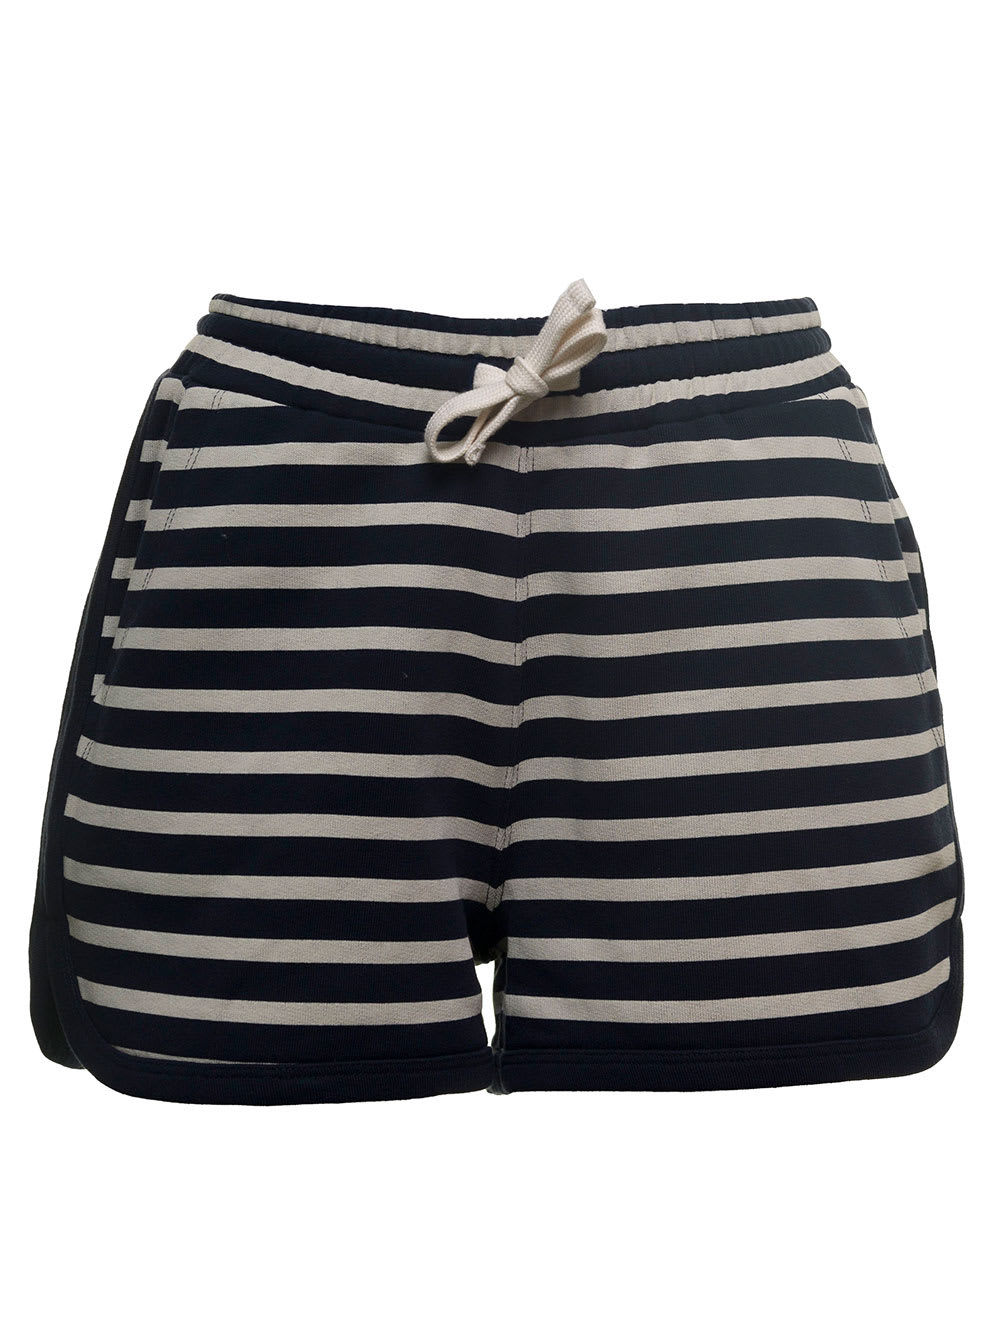 RED Valentino Striped Jersey Shorts With Logo